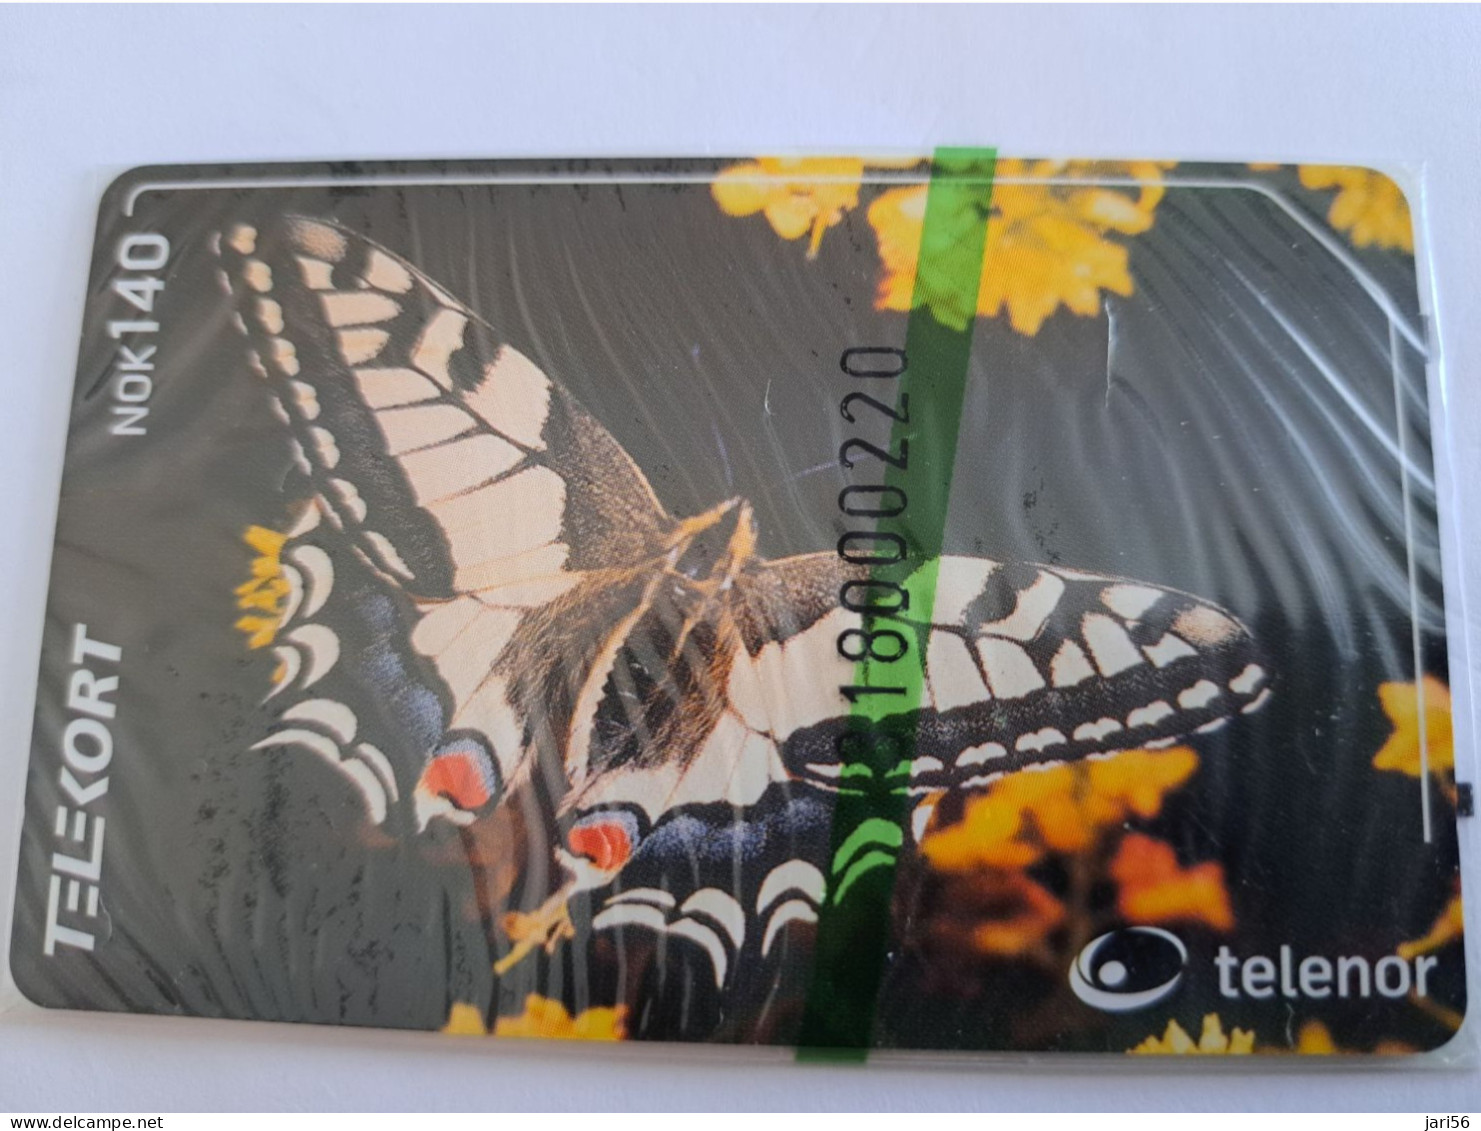 NORWAY / CHIPCARD/  TELENOR / 140 NOK  /  BUTTERFLY/ PAPPILLION/  / TIRAGE 7000 /    N-211  MINT IN WRAPPER **14521** - Norvège